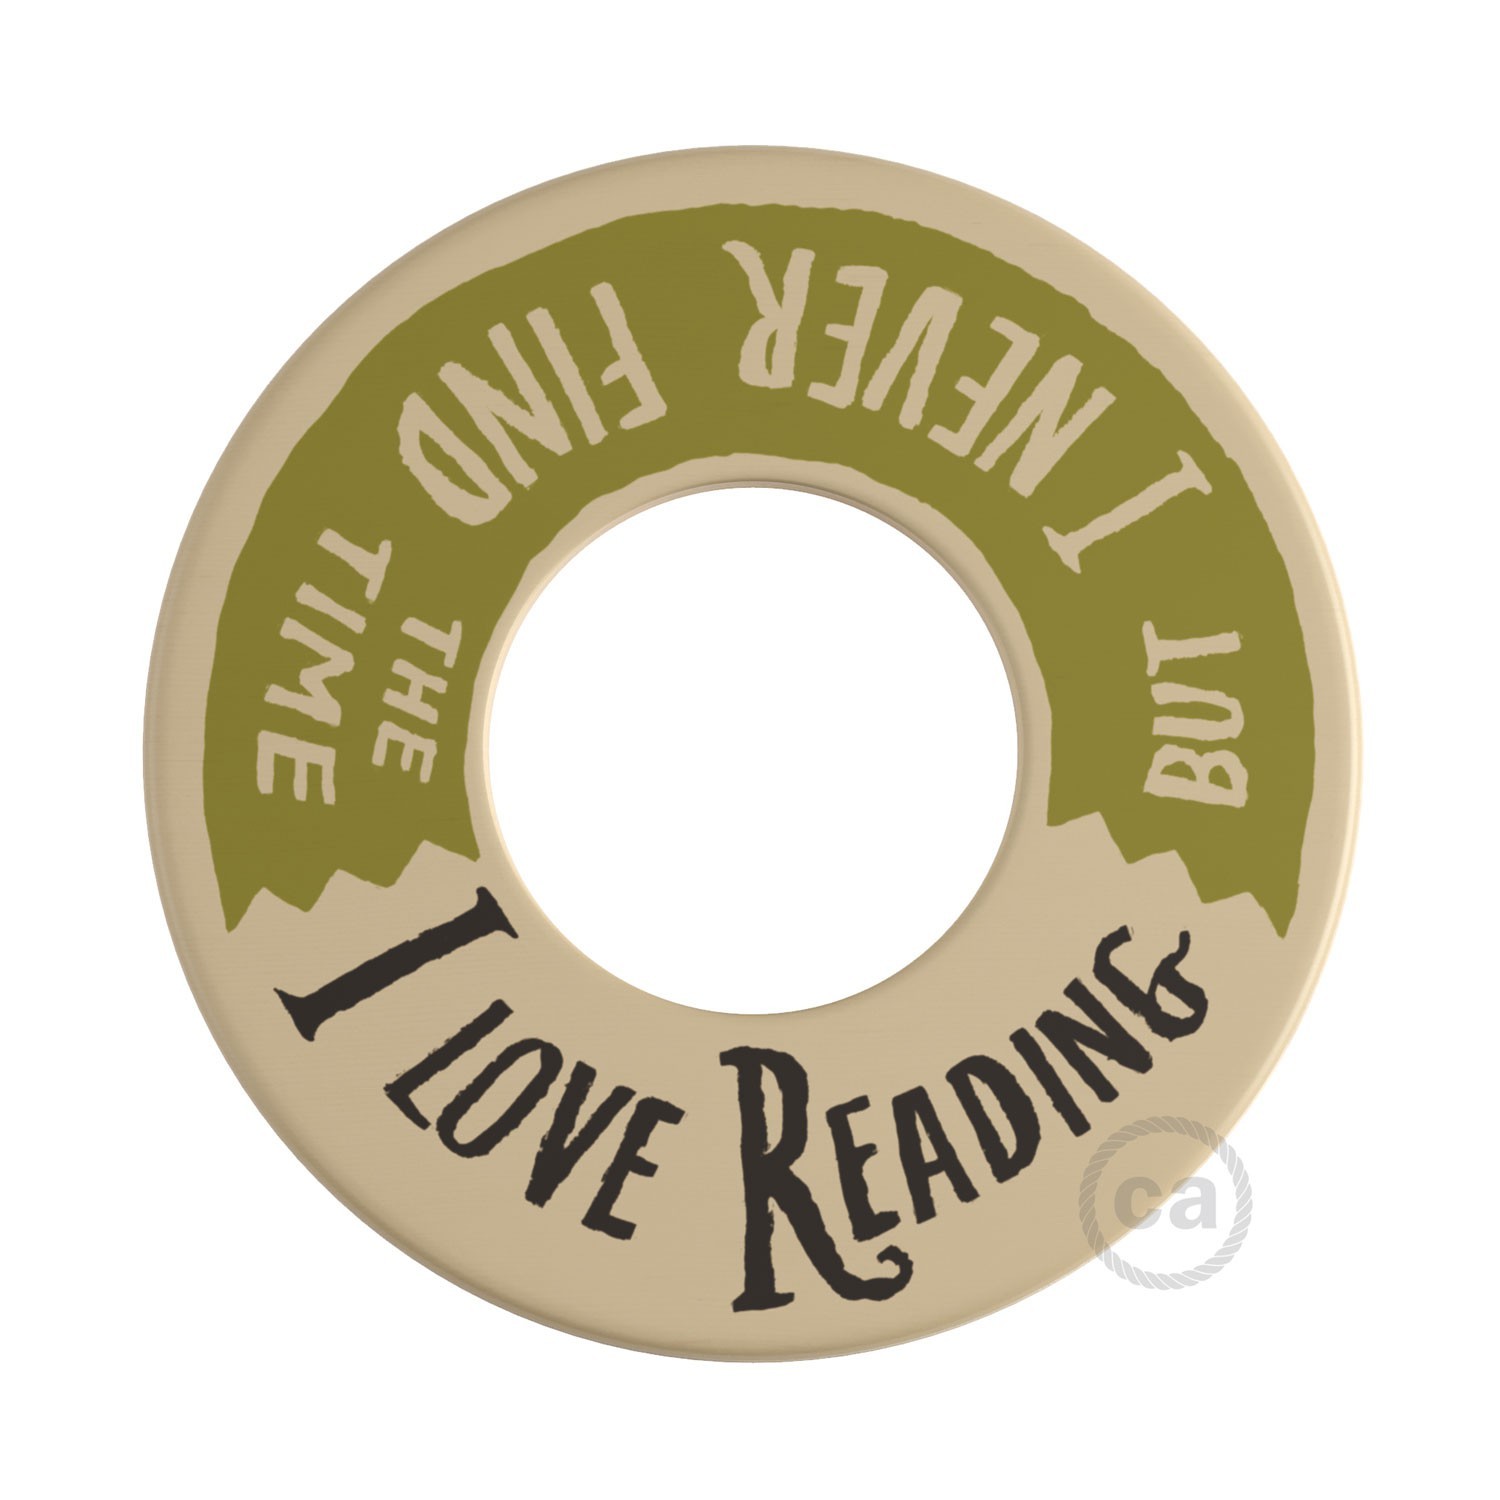 MINI-UFO: reversible wooden disk READING BALLSH*T collection, subject LOVE READING + 2 PAGES